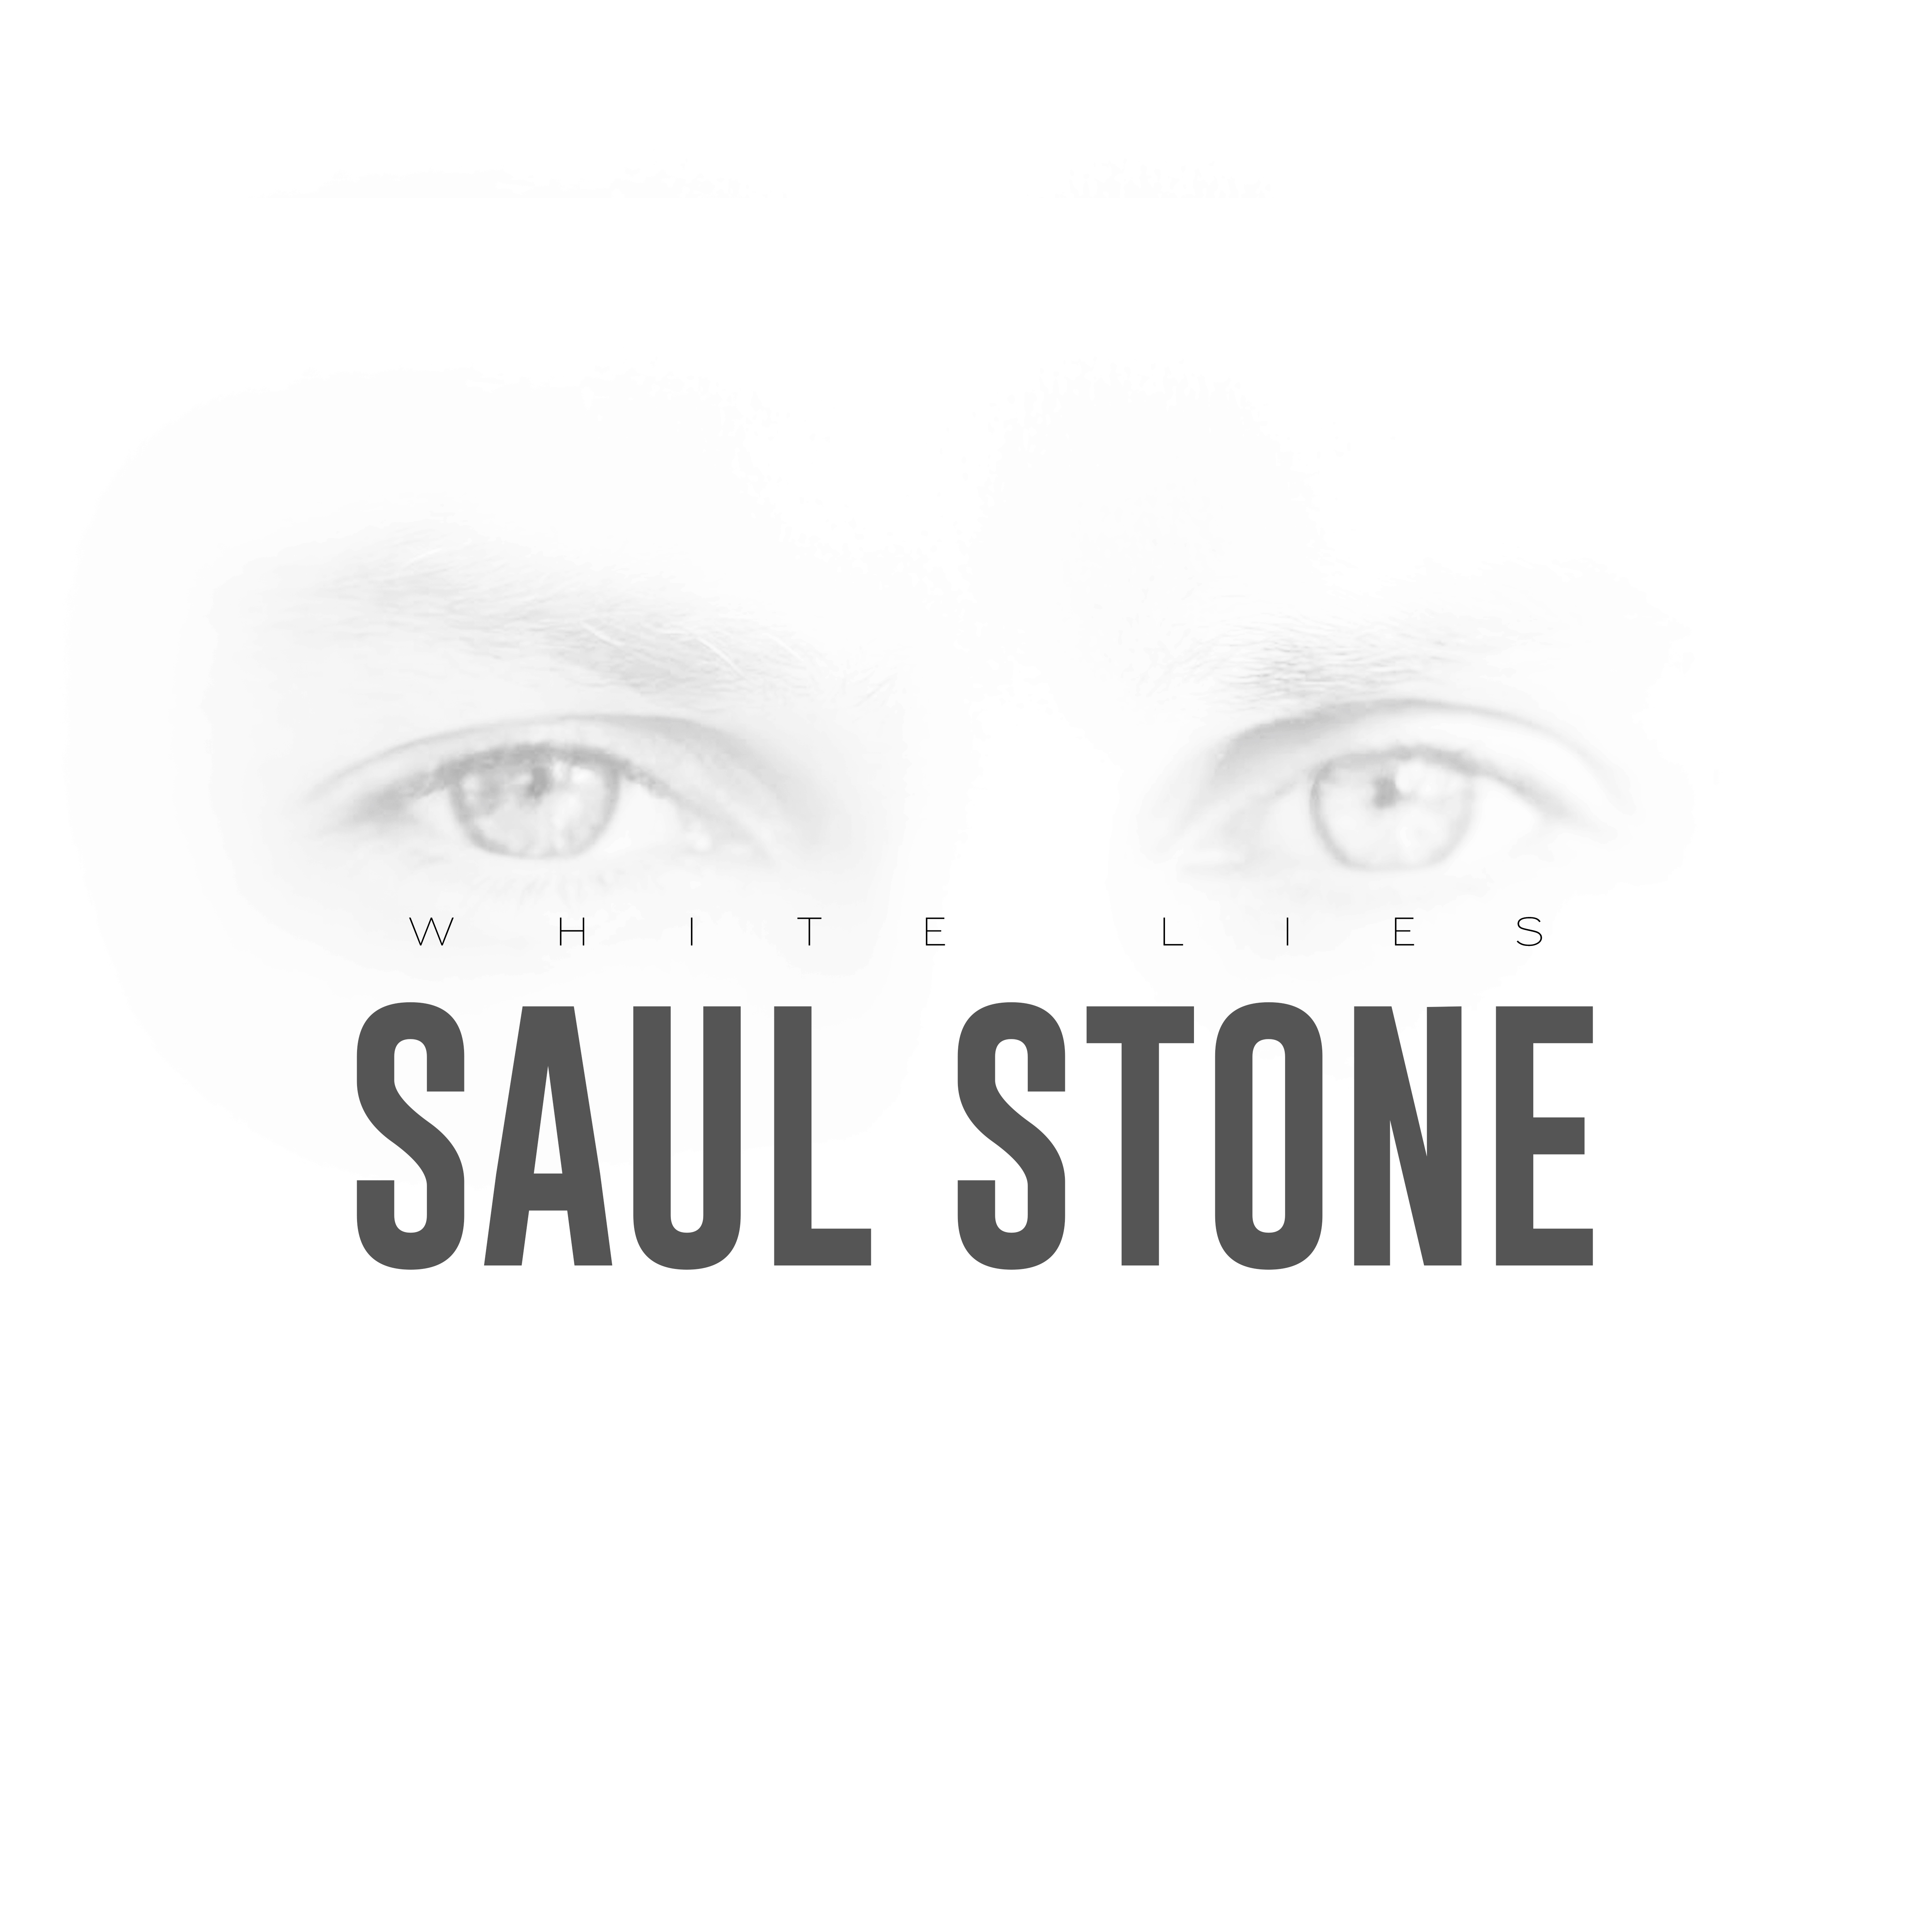 New Music: Saul Stone "Chastang - White Lies" (Acoustic)